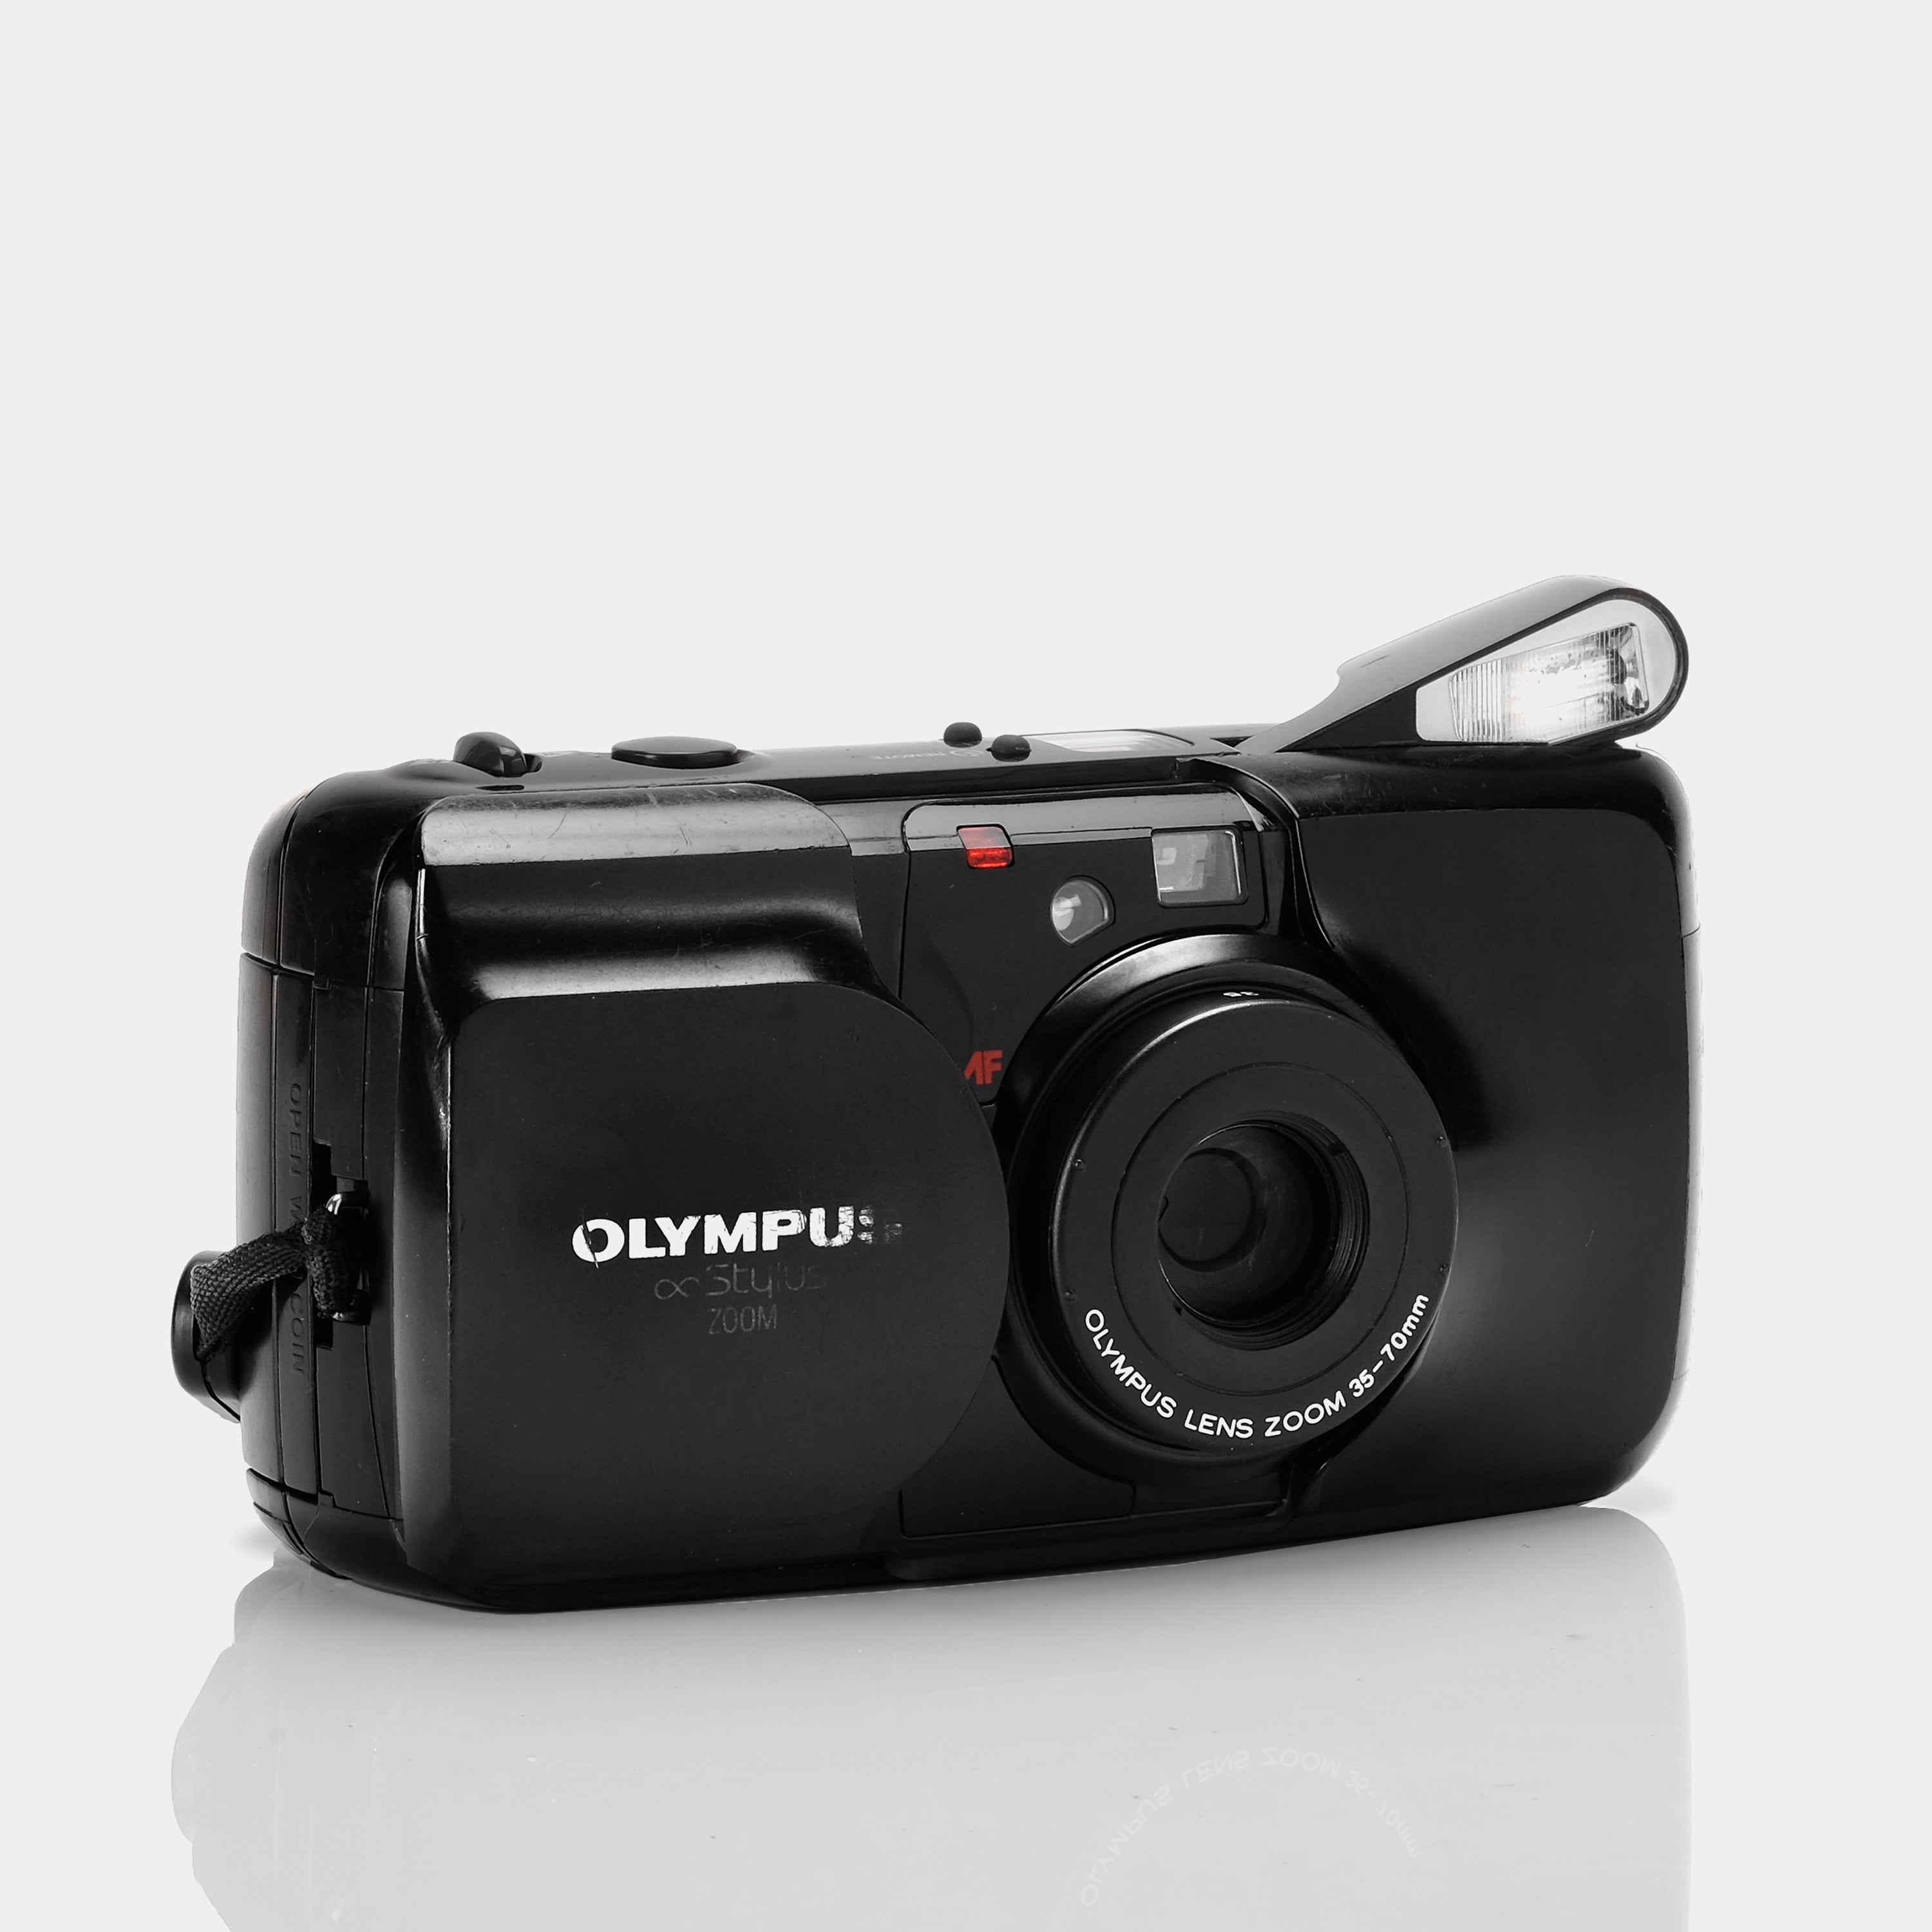 Olympus ∞ Infinity Stylus Zoom 35mm Point and Shoot Film Camera